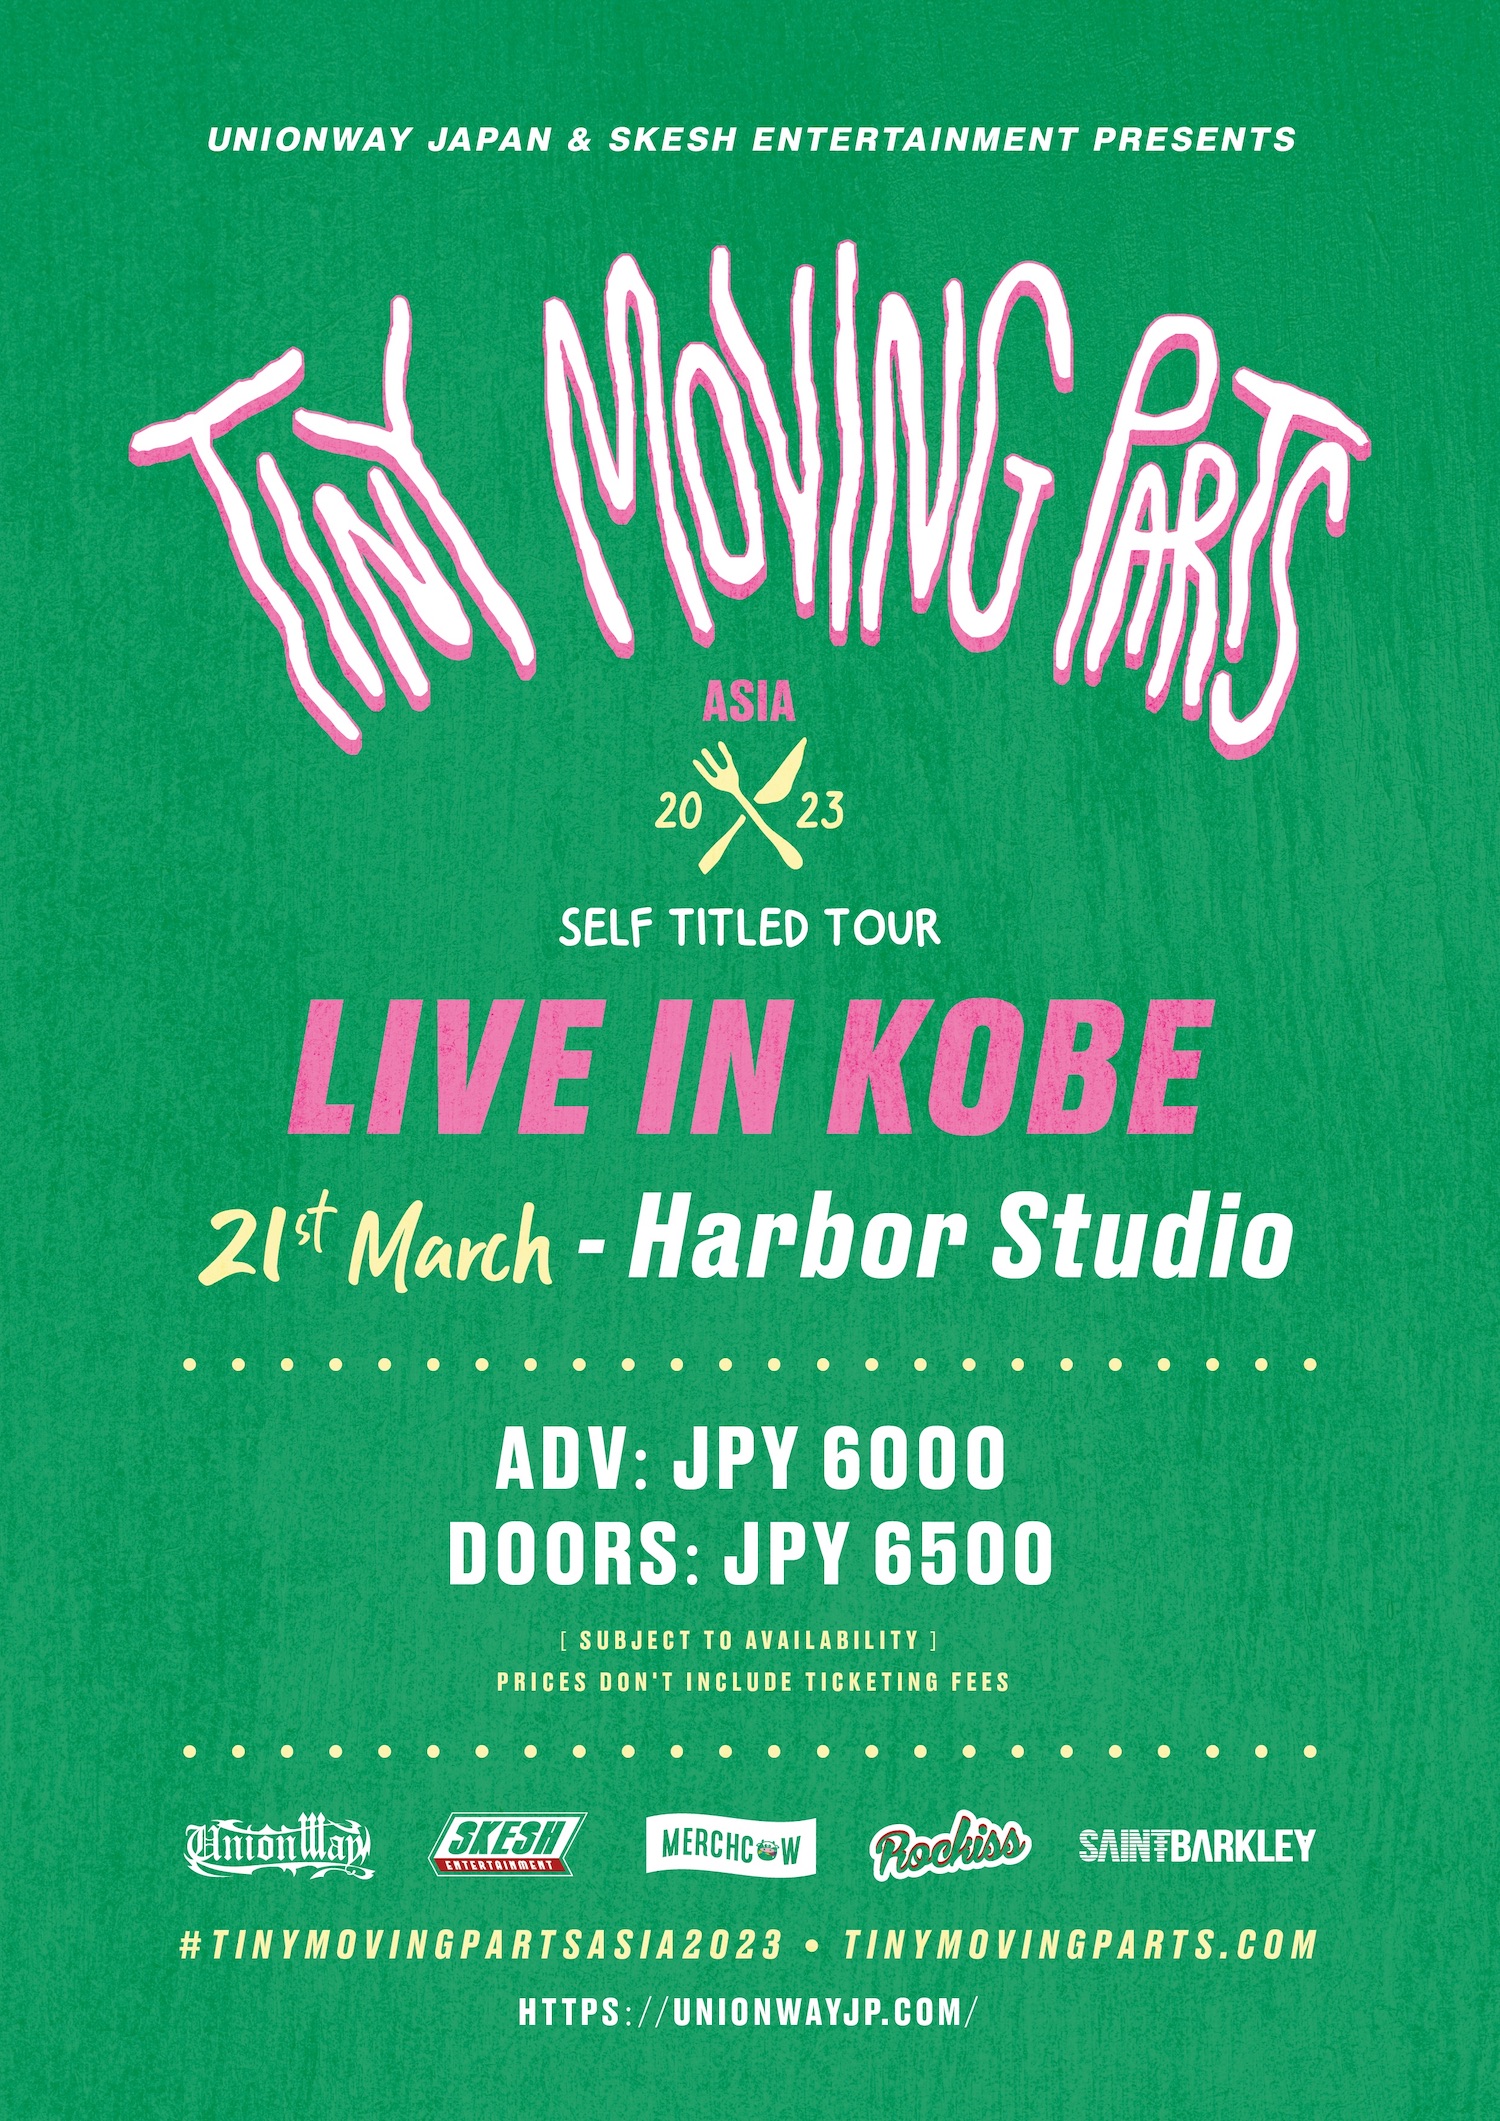 UNIONWAY presents TINY MOVING PARTS 「SELF TITLED ASIA TOUR 2023」